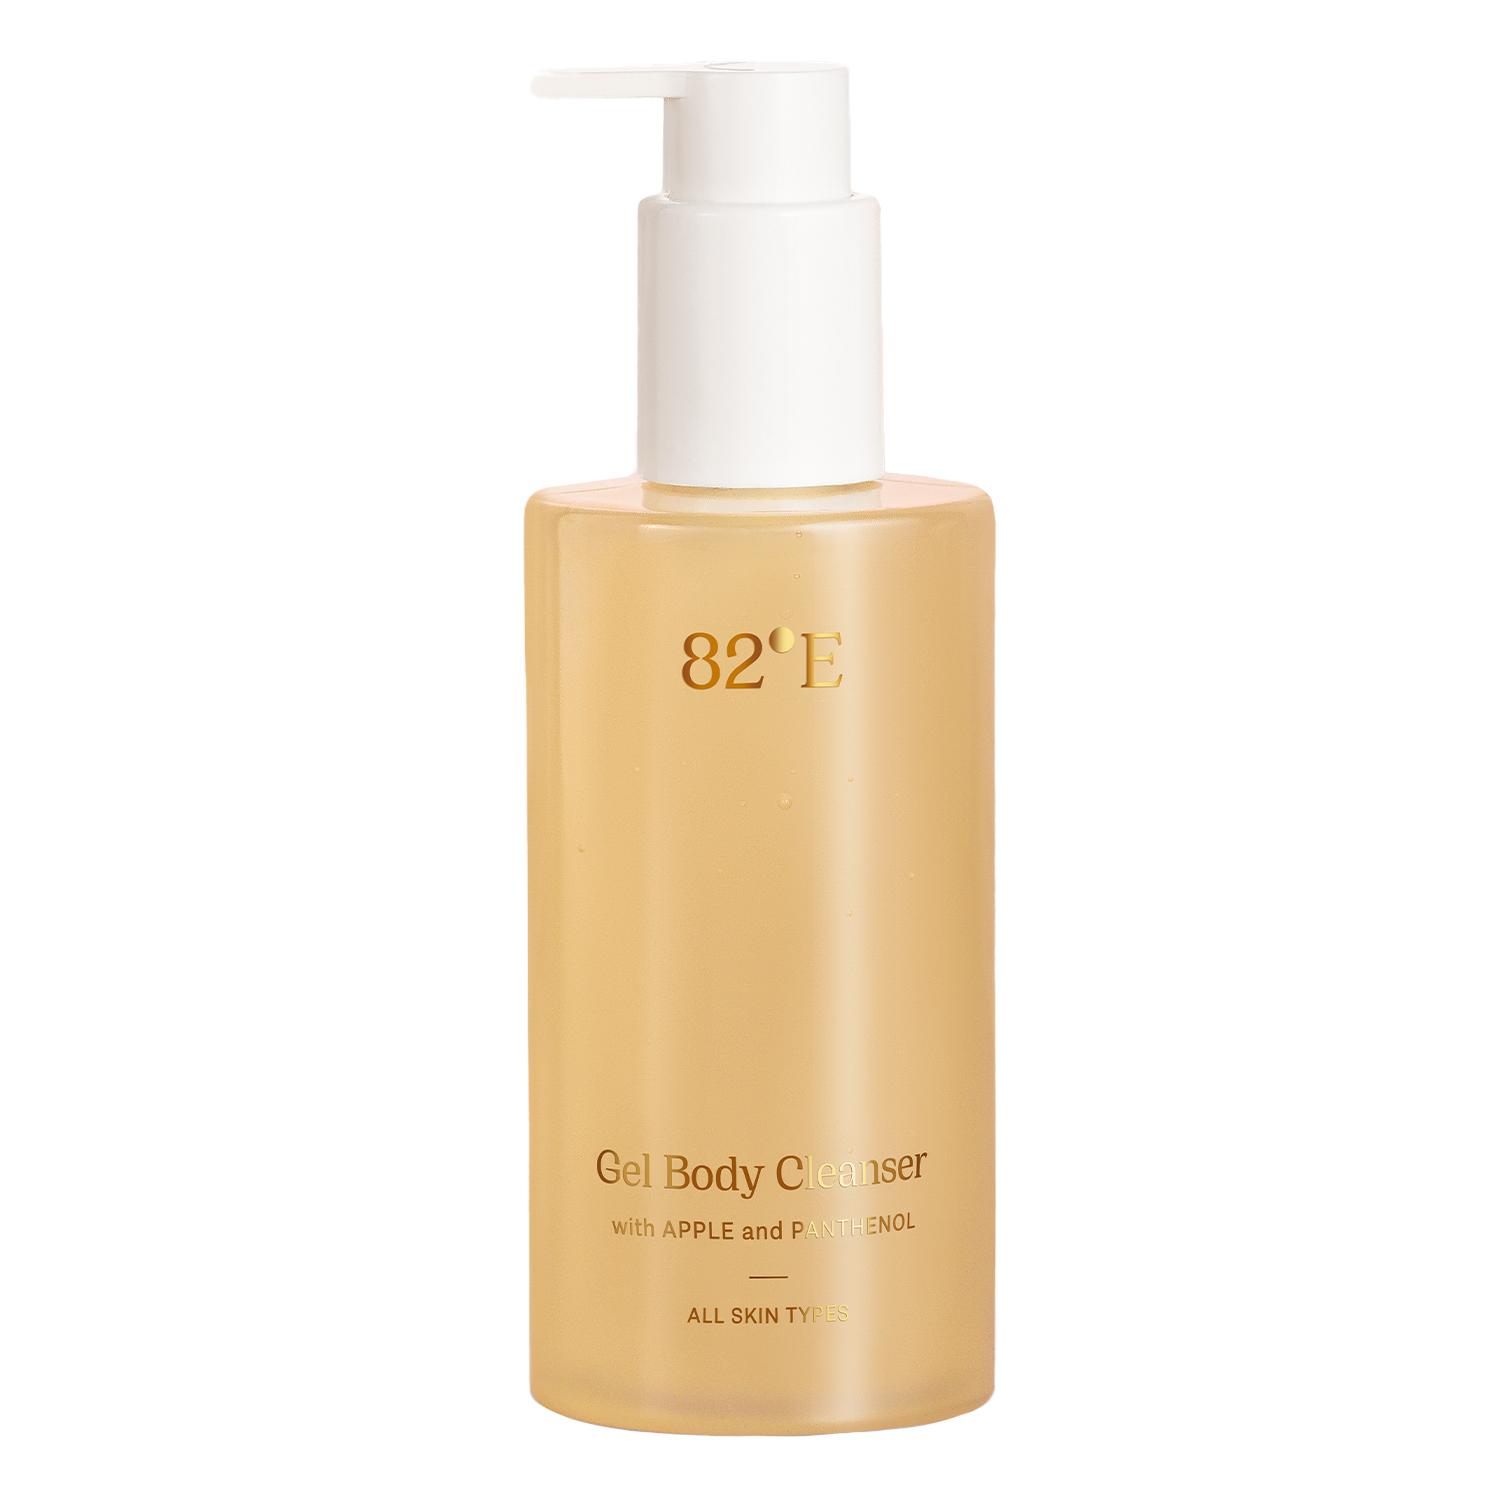 82°E | 82°E Gel Body Cleanser with Apple and Panthenol (240 ml)